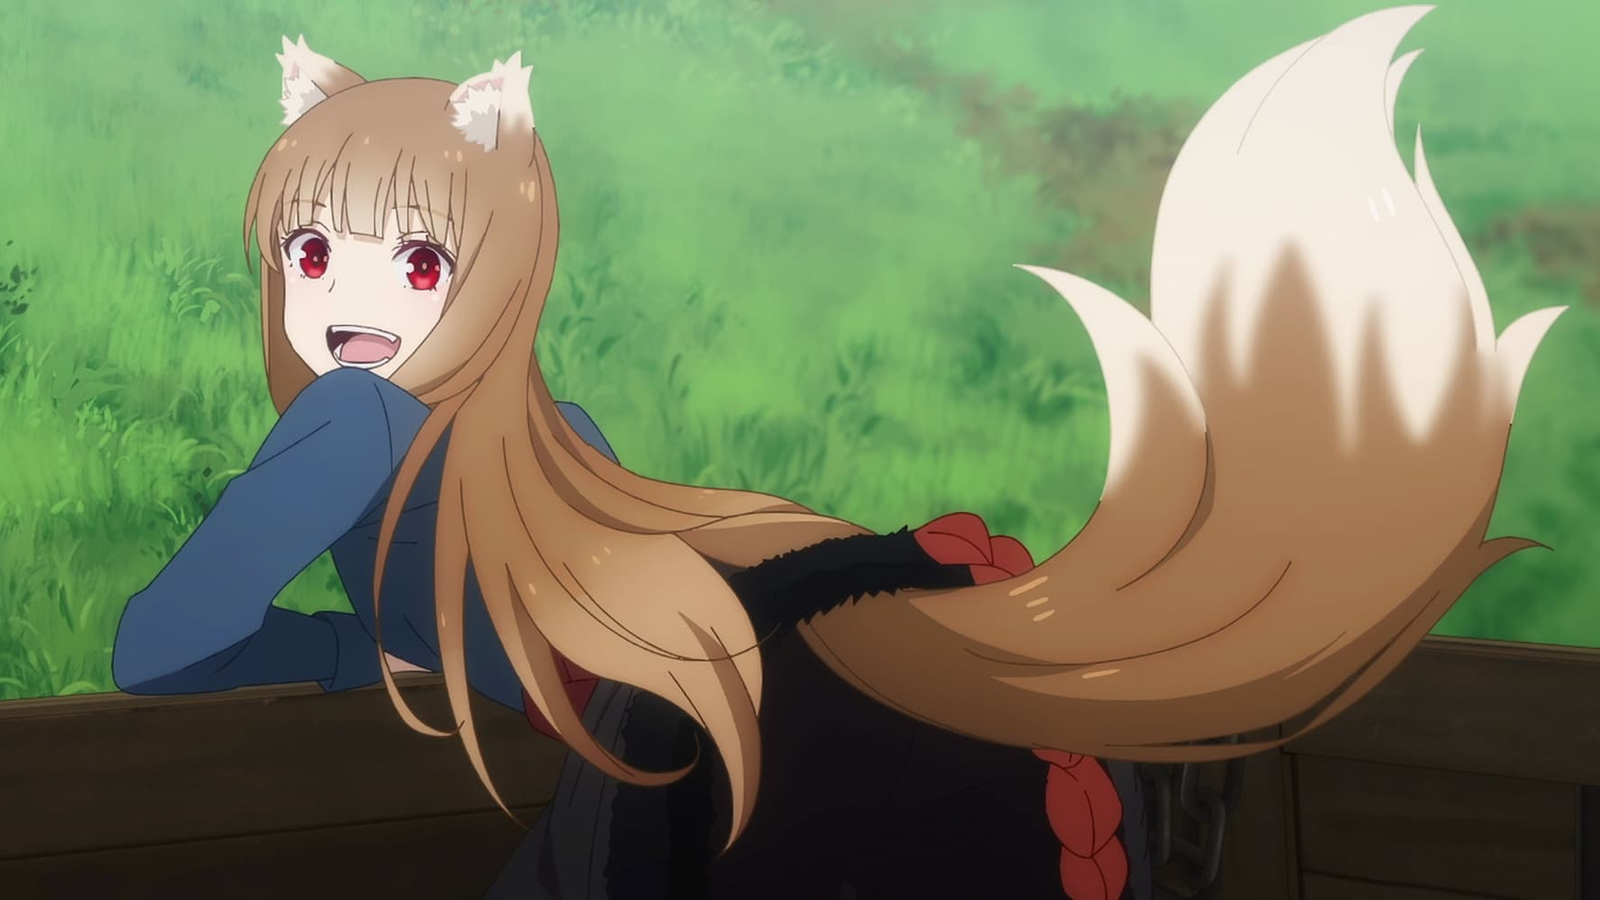 Spice and Wolf Episode 11: Recap, Release Date, Expected Plot, where to watch?